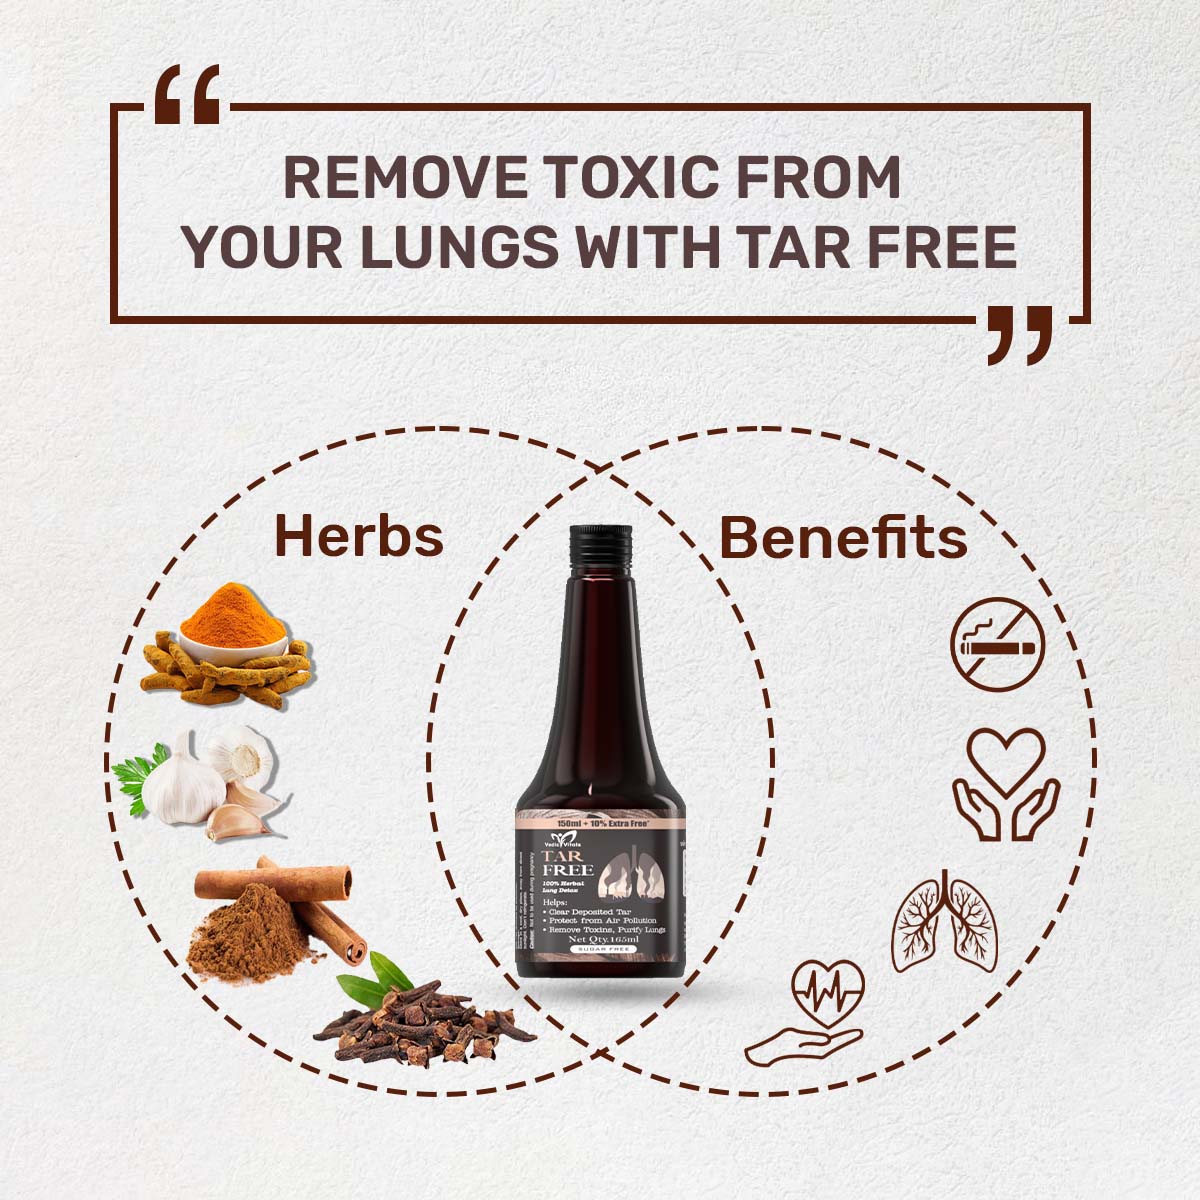 Clear The Smoke: Reclaim Your Breath & Health With Tar Free Lung Detox Syrup